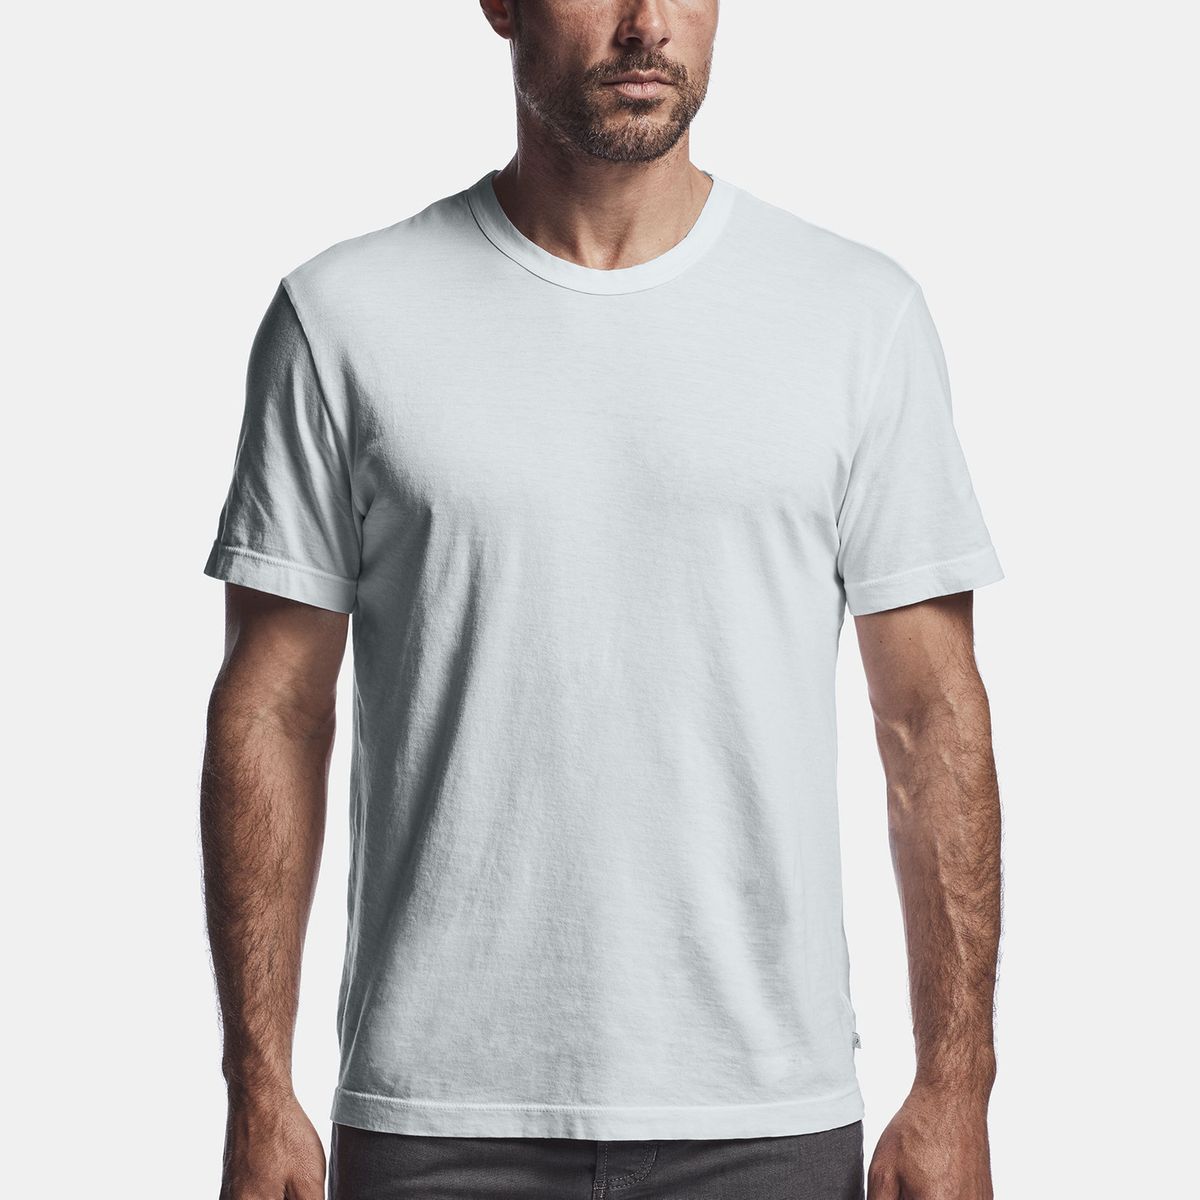 tee shirts for men